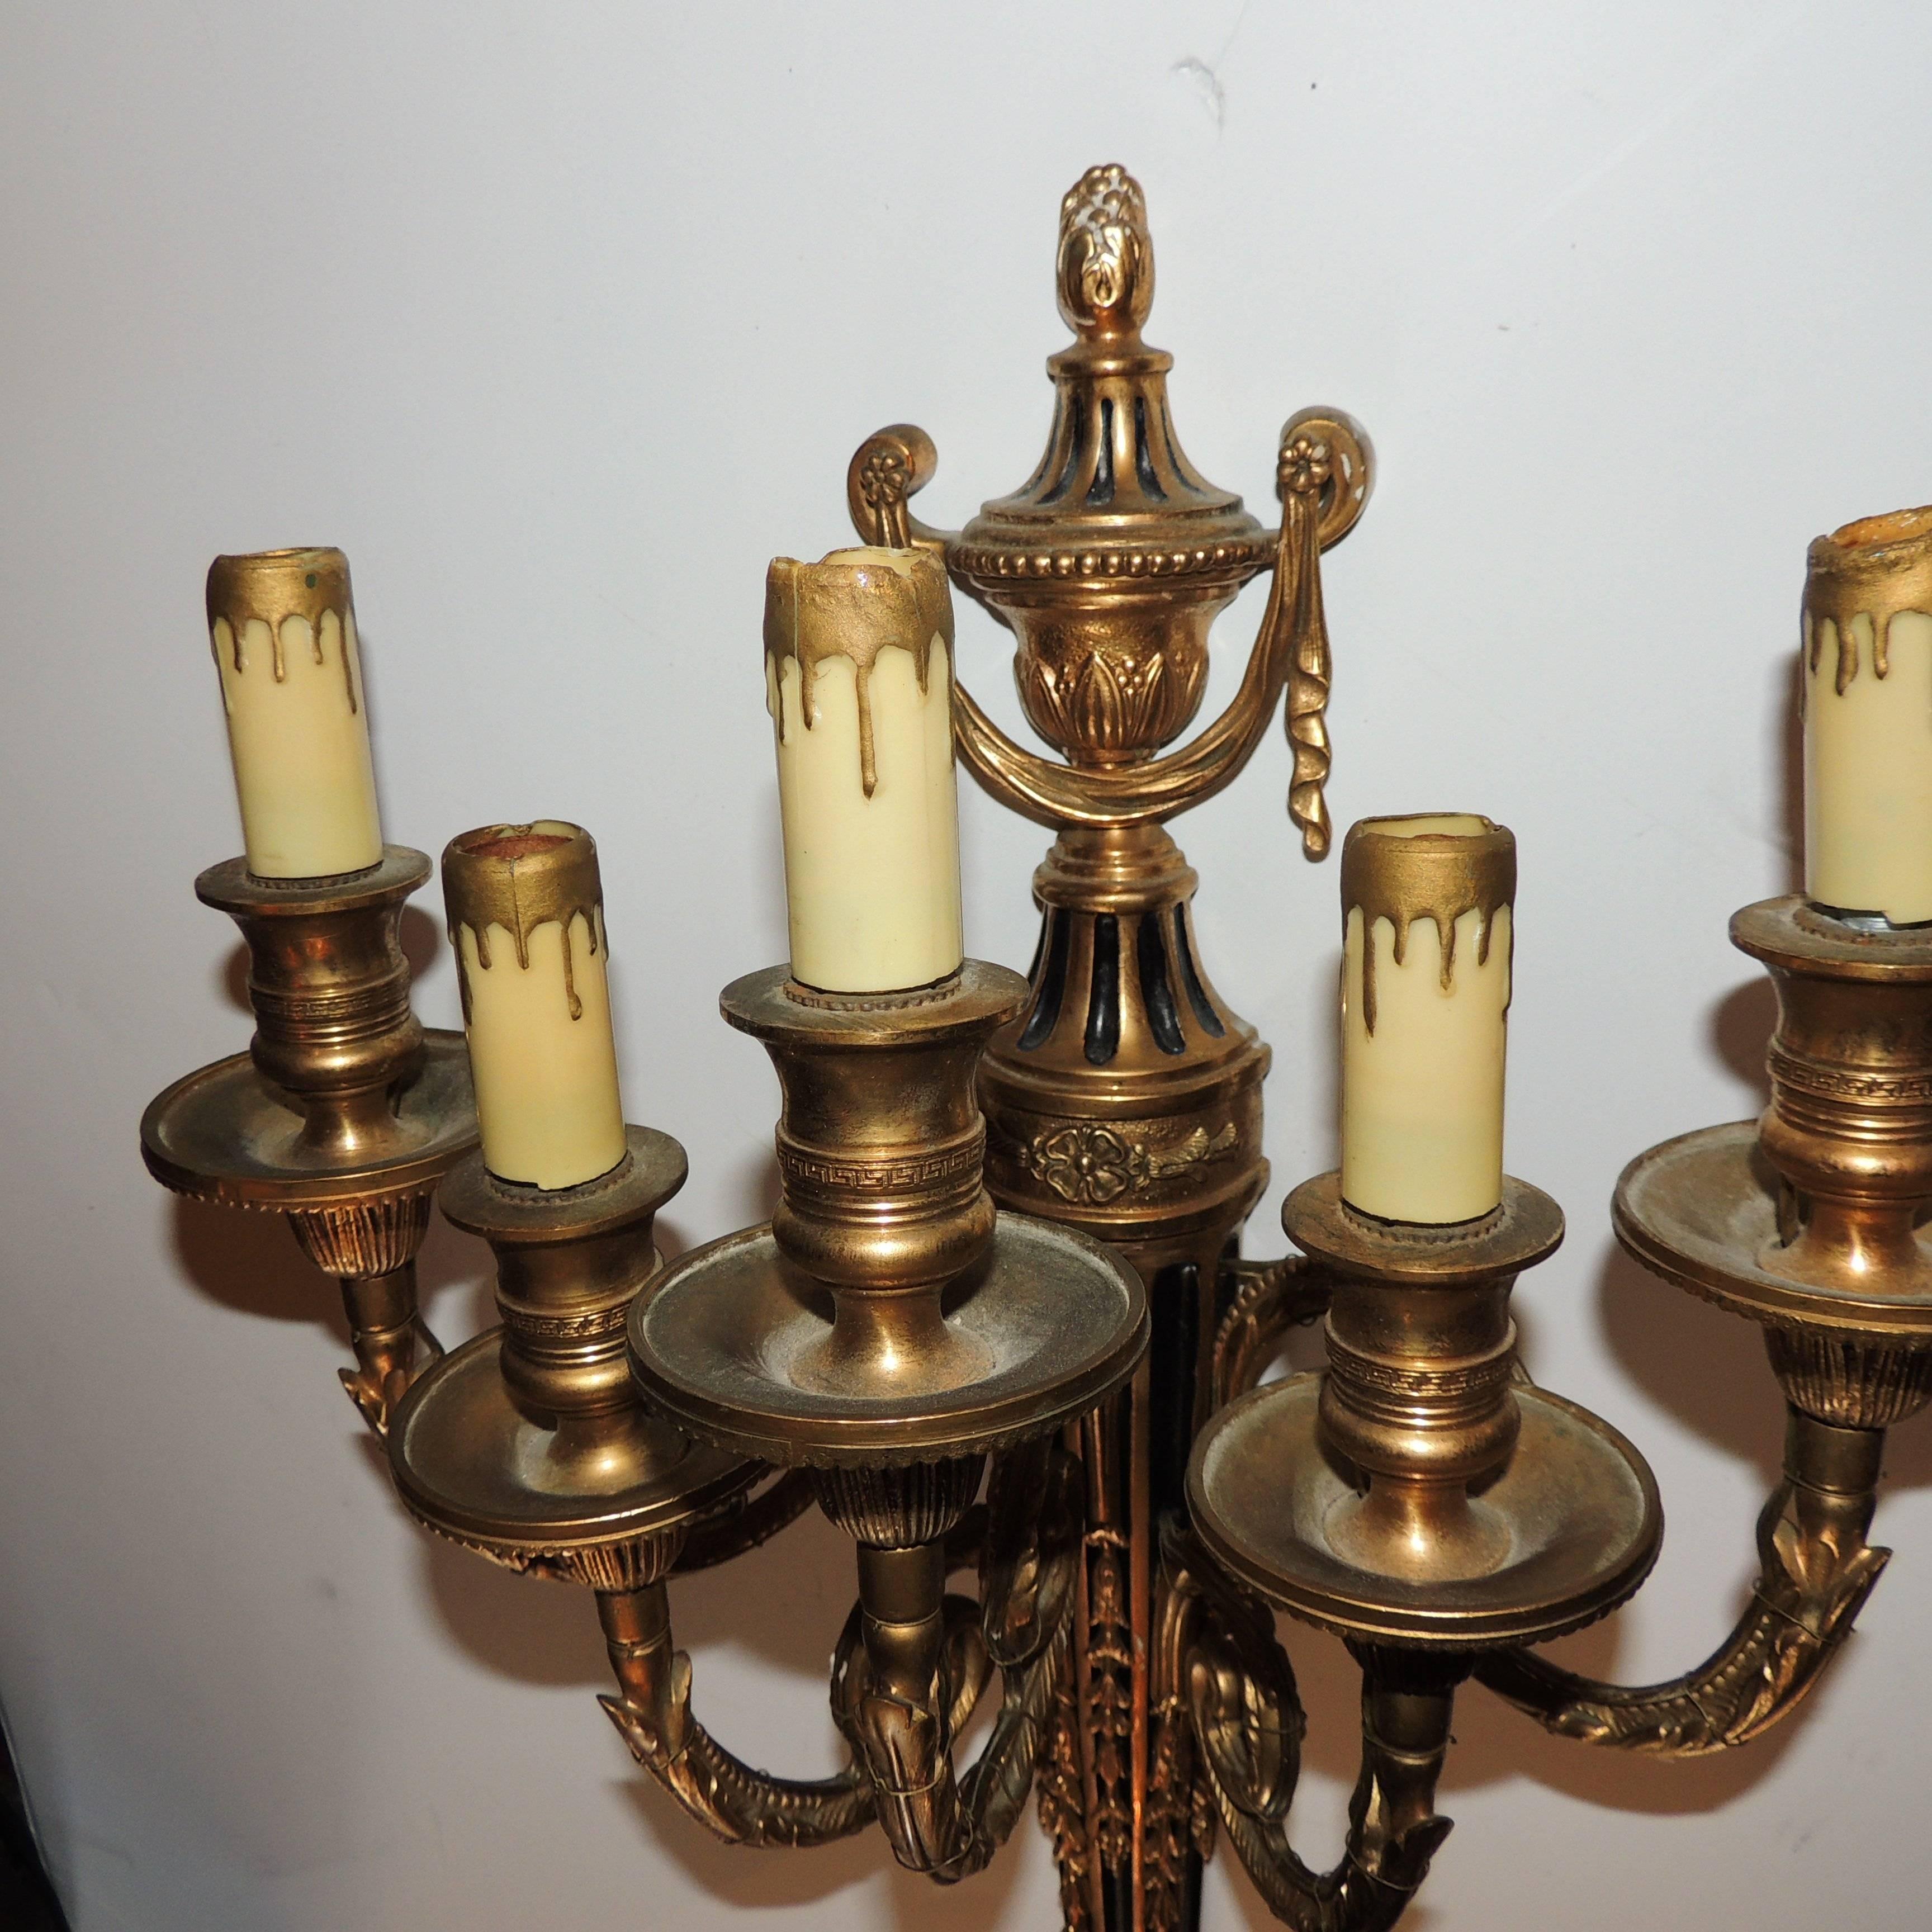 French Wonderful Neoclassical Dore Bronze Patinated Five-Arm Urn Top Regency Sconce For Sale